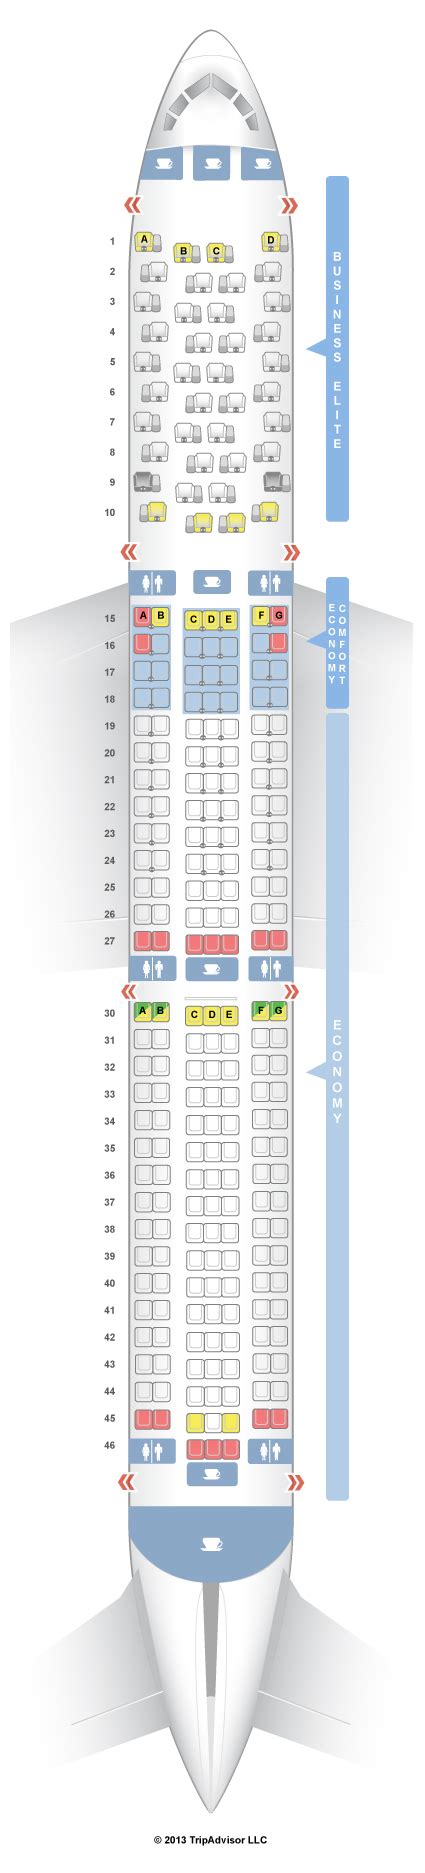 Boeing 767 Seat Map Hot Sex Picture